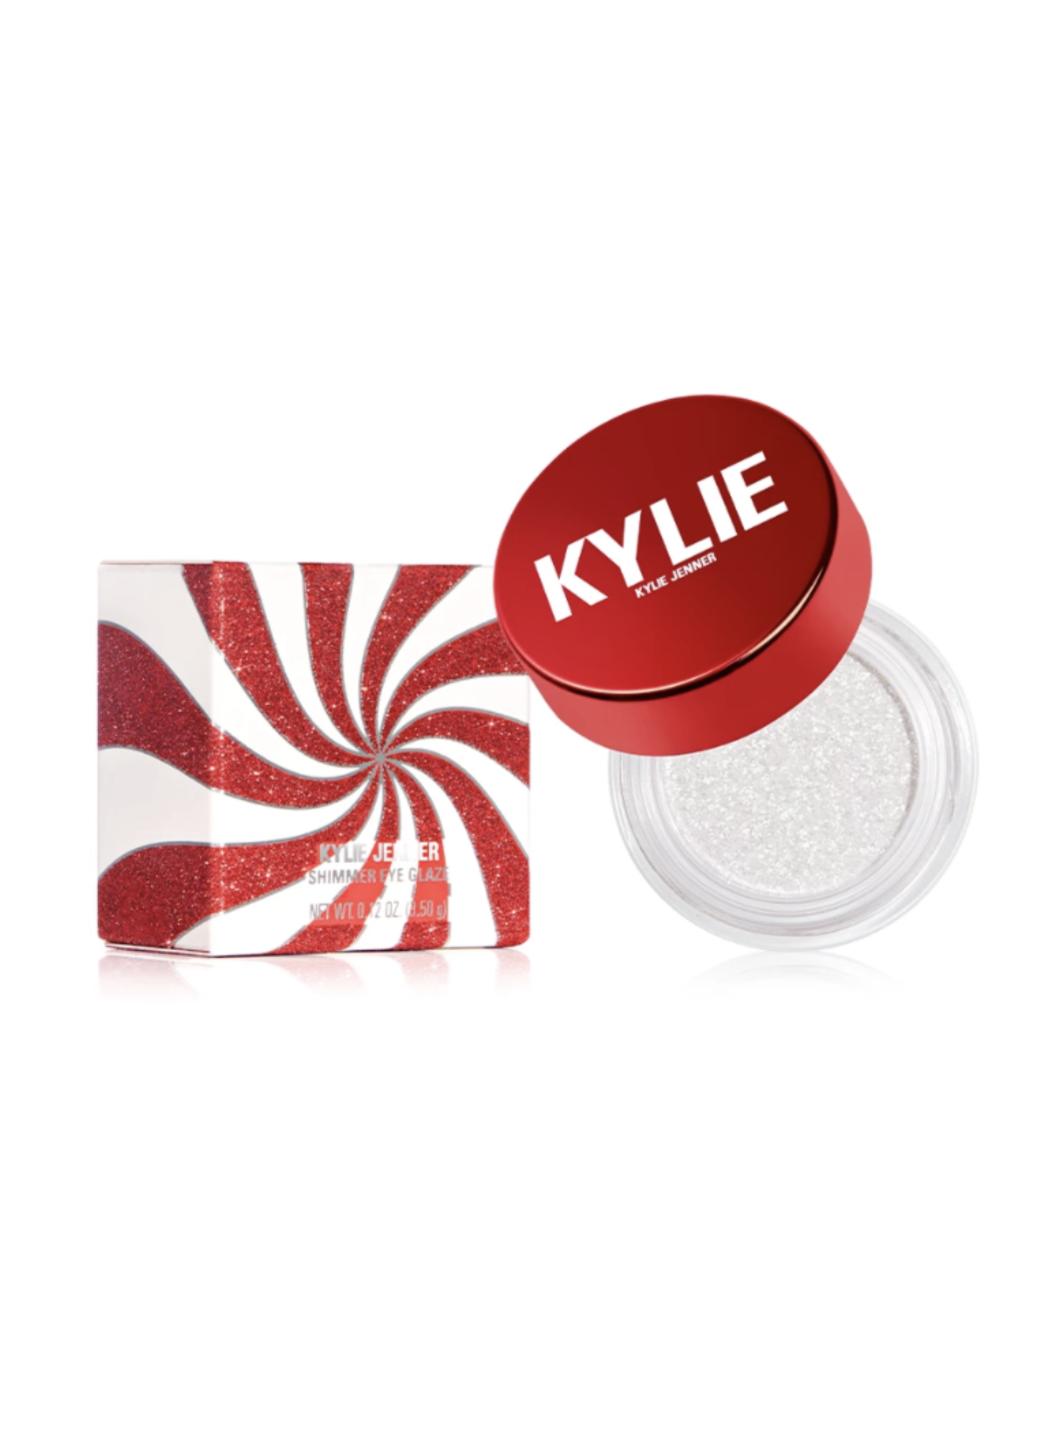 Kylie Cosmetics Shimmer Eye Glaze Icy What You Mean